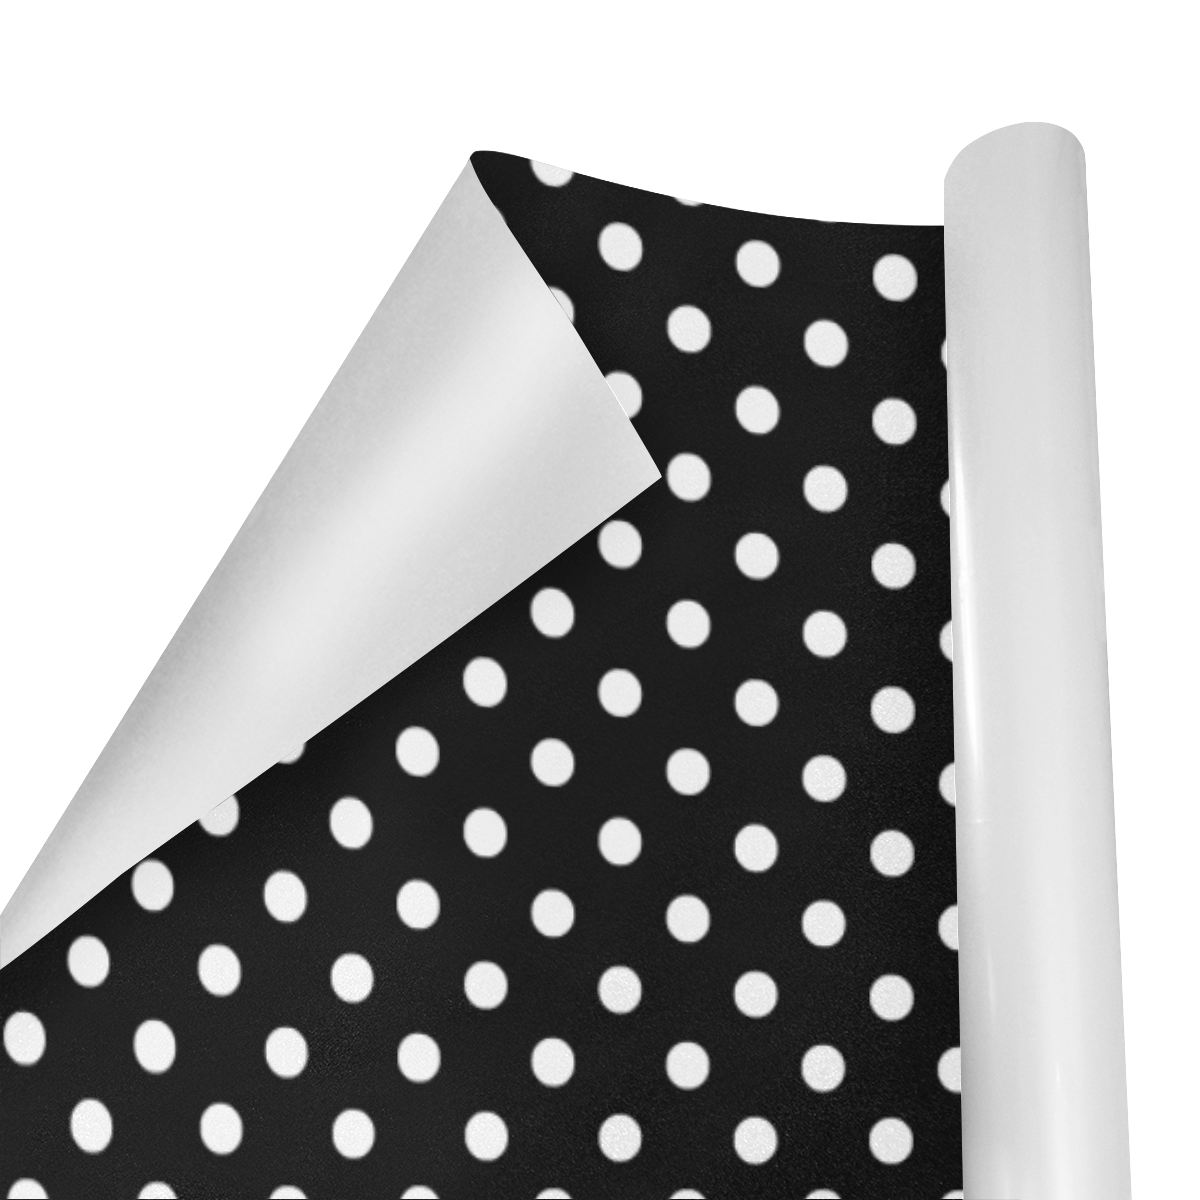 White Polka Dots on Black Gift Wrapping Paper 58"x 23" (3 Rolls)